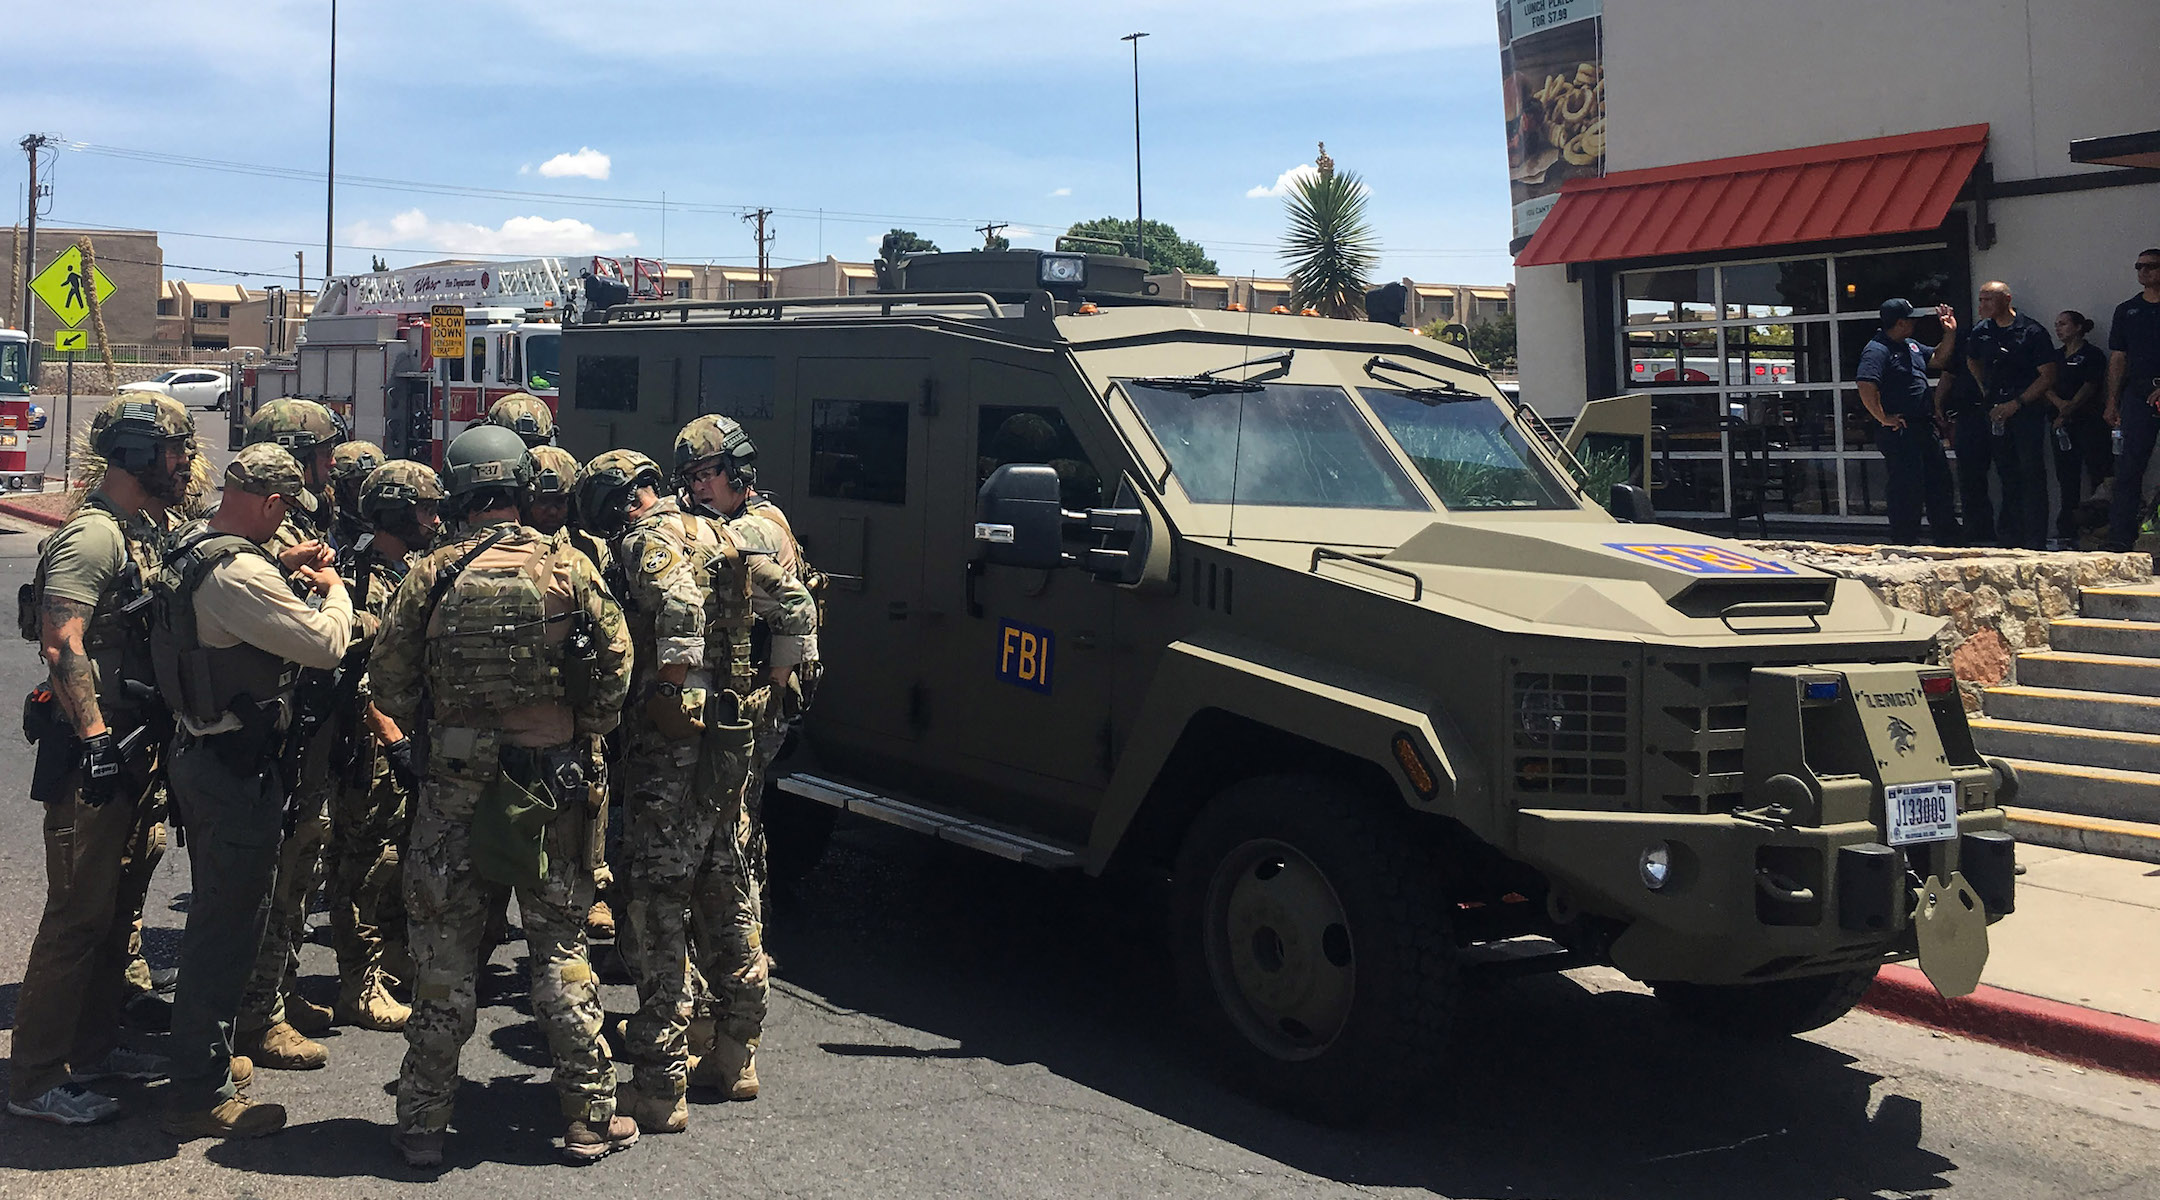 Armed policemen gather next to an FBI armored vehicle next to the Cielo Vista Mall in El Paso on August 3, 2019. The shooter is being investigated as a domestic terrorist. (Joel Angel Juarez/AFP/Getty Images)